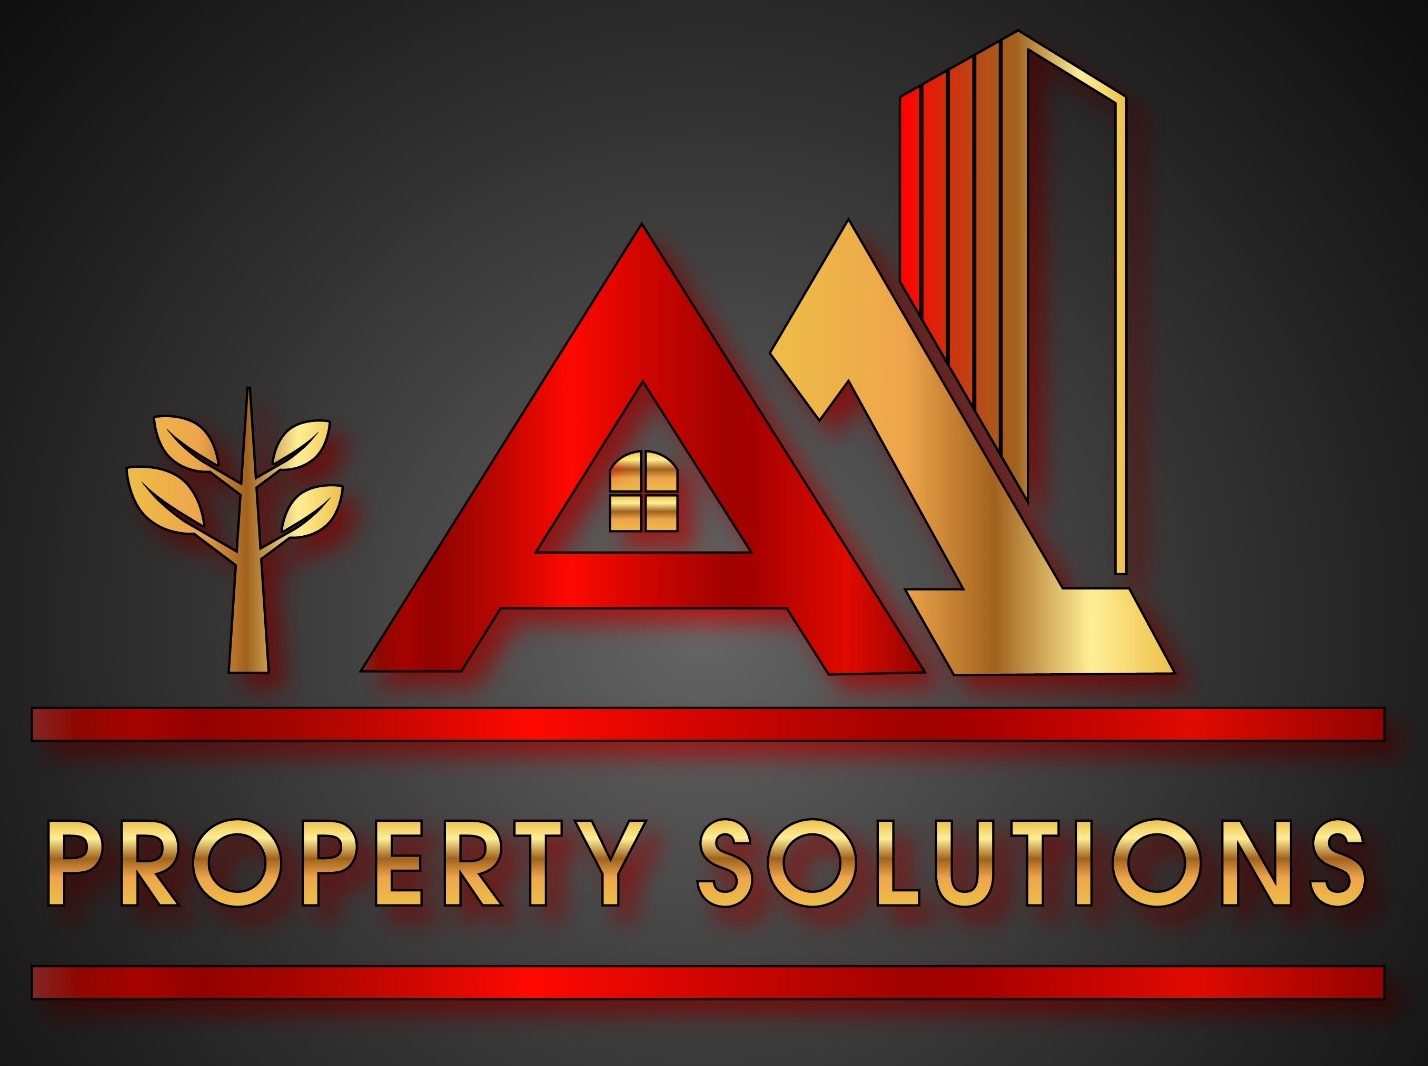 A1 Property Solutions